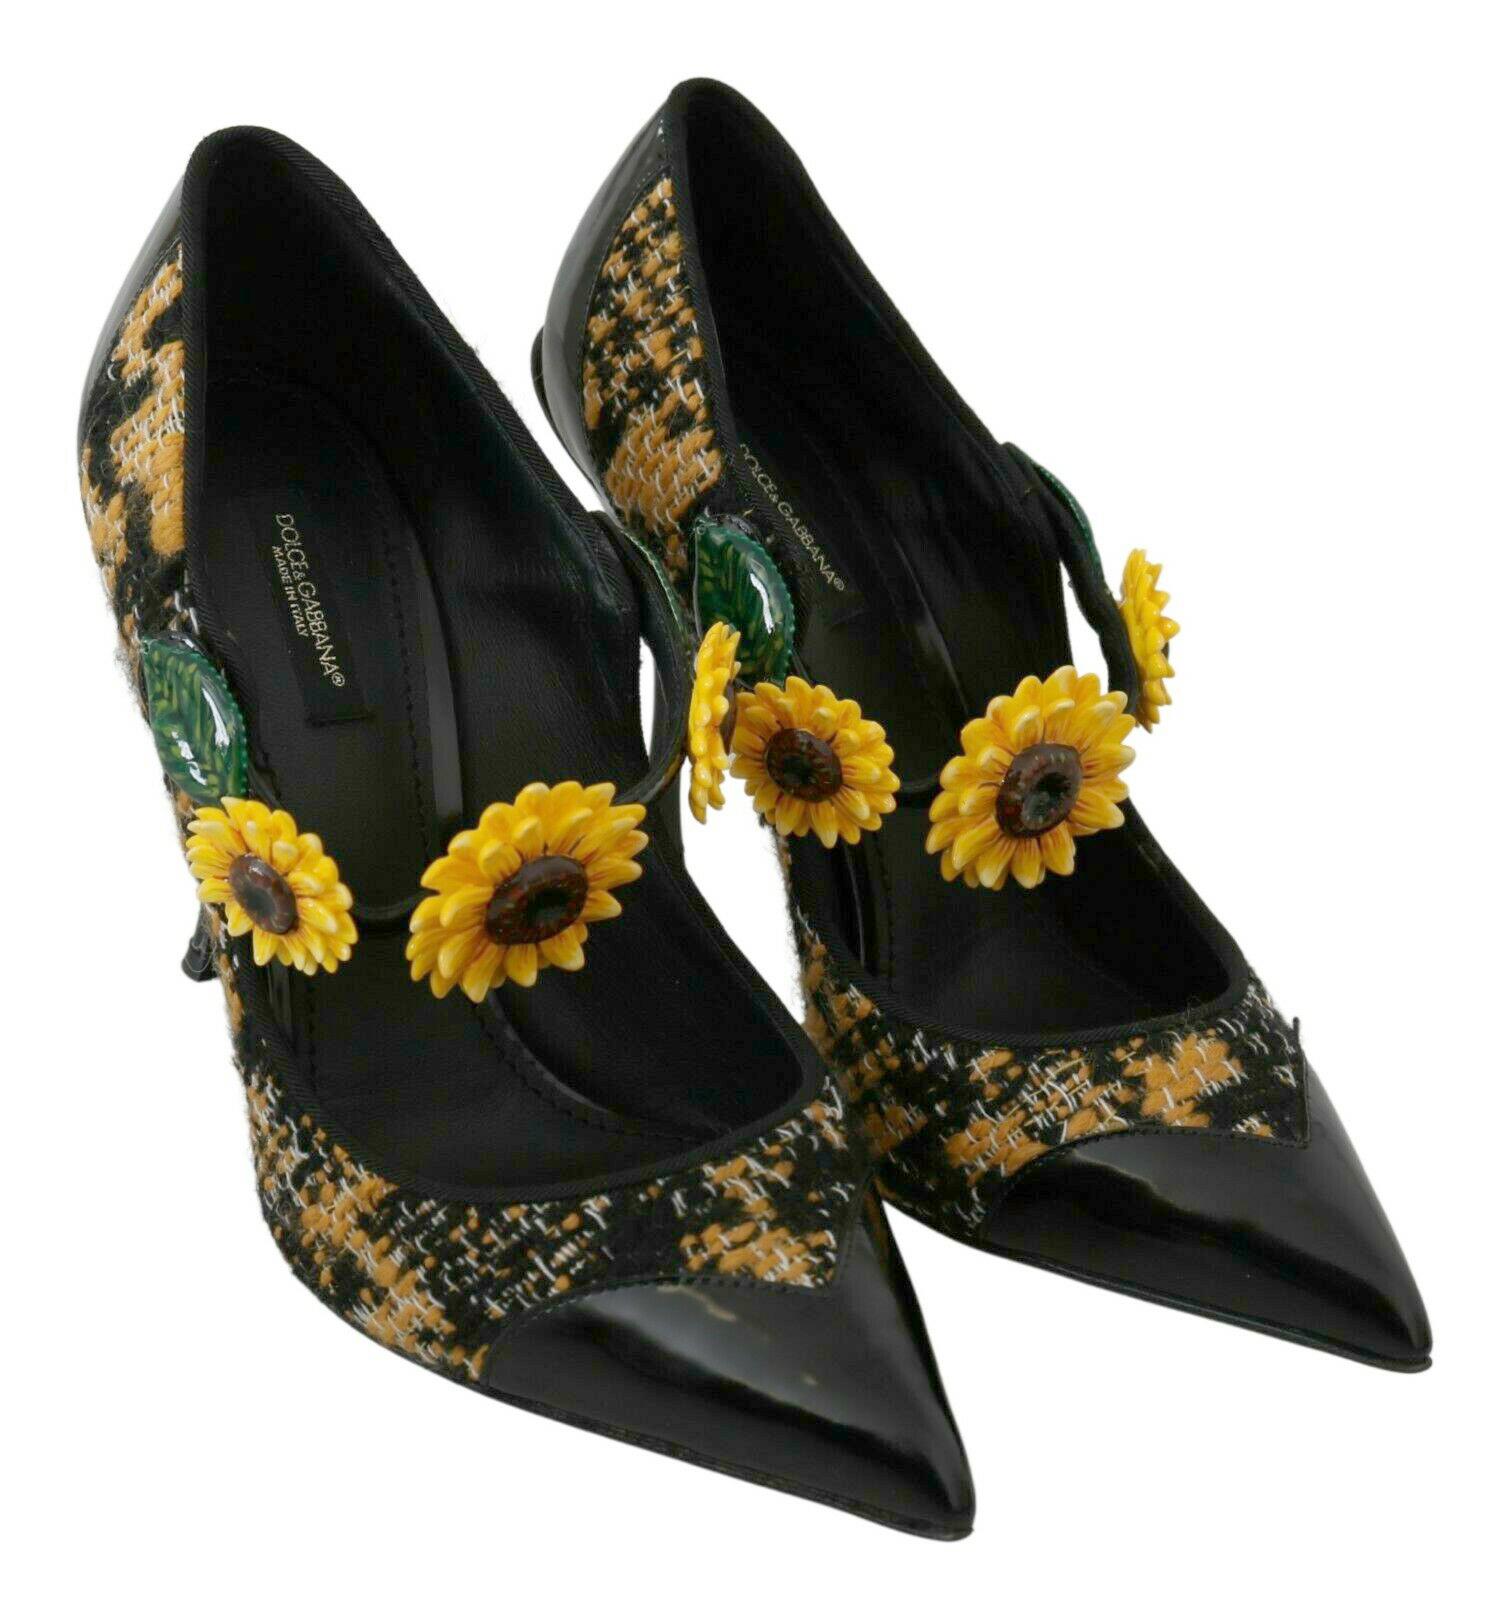 Dolce & Gabbana Black Yellow Mary Jane Leather Pumps Heels Shoes Floral Boucle 2